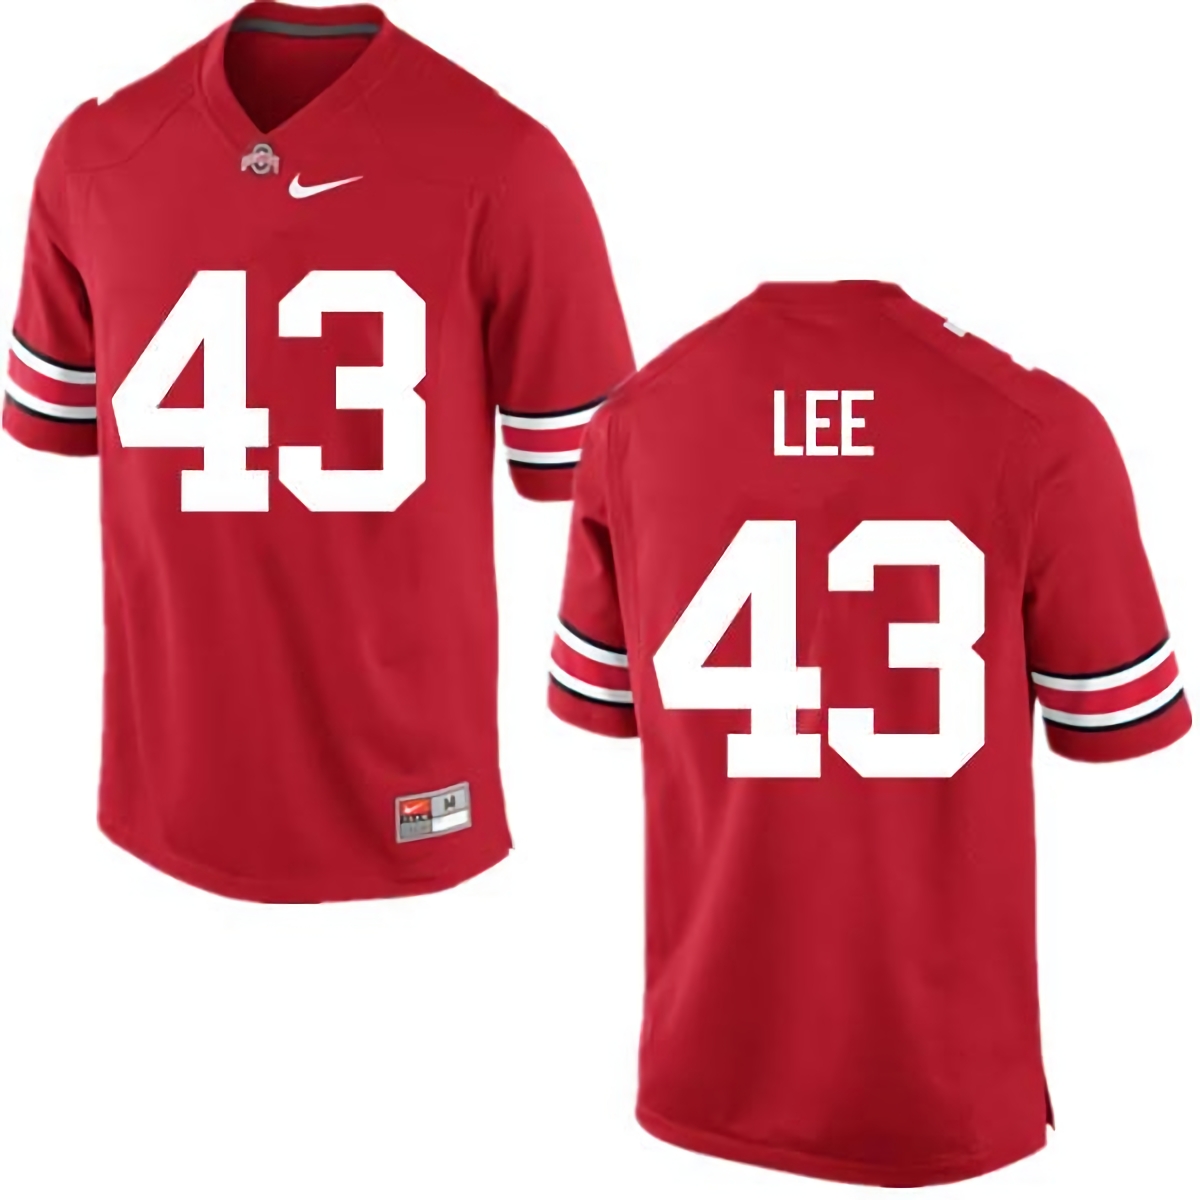 Darron Lee Ohio State Buckeyes Men's NCAA #43 Nike Red College Stitched Football Jersey ZAF1356VE